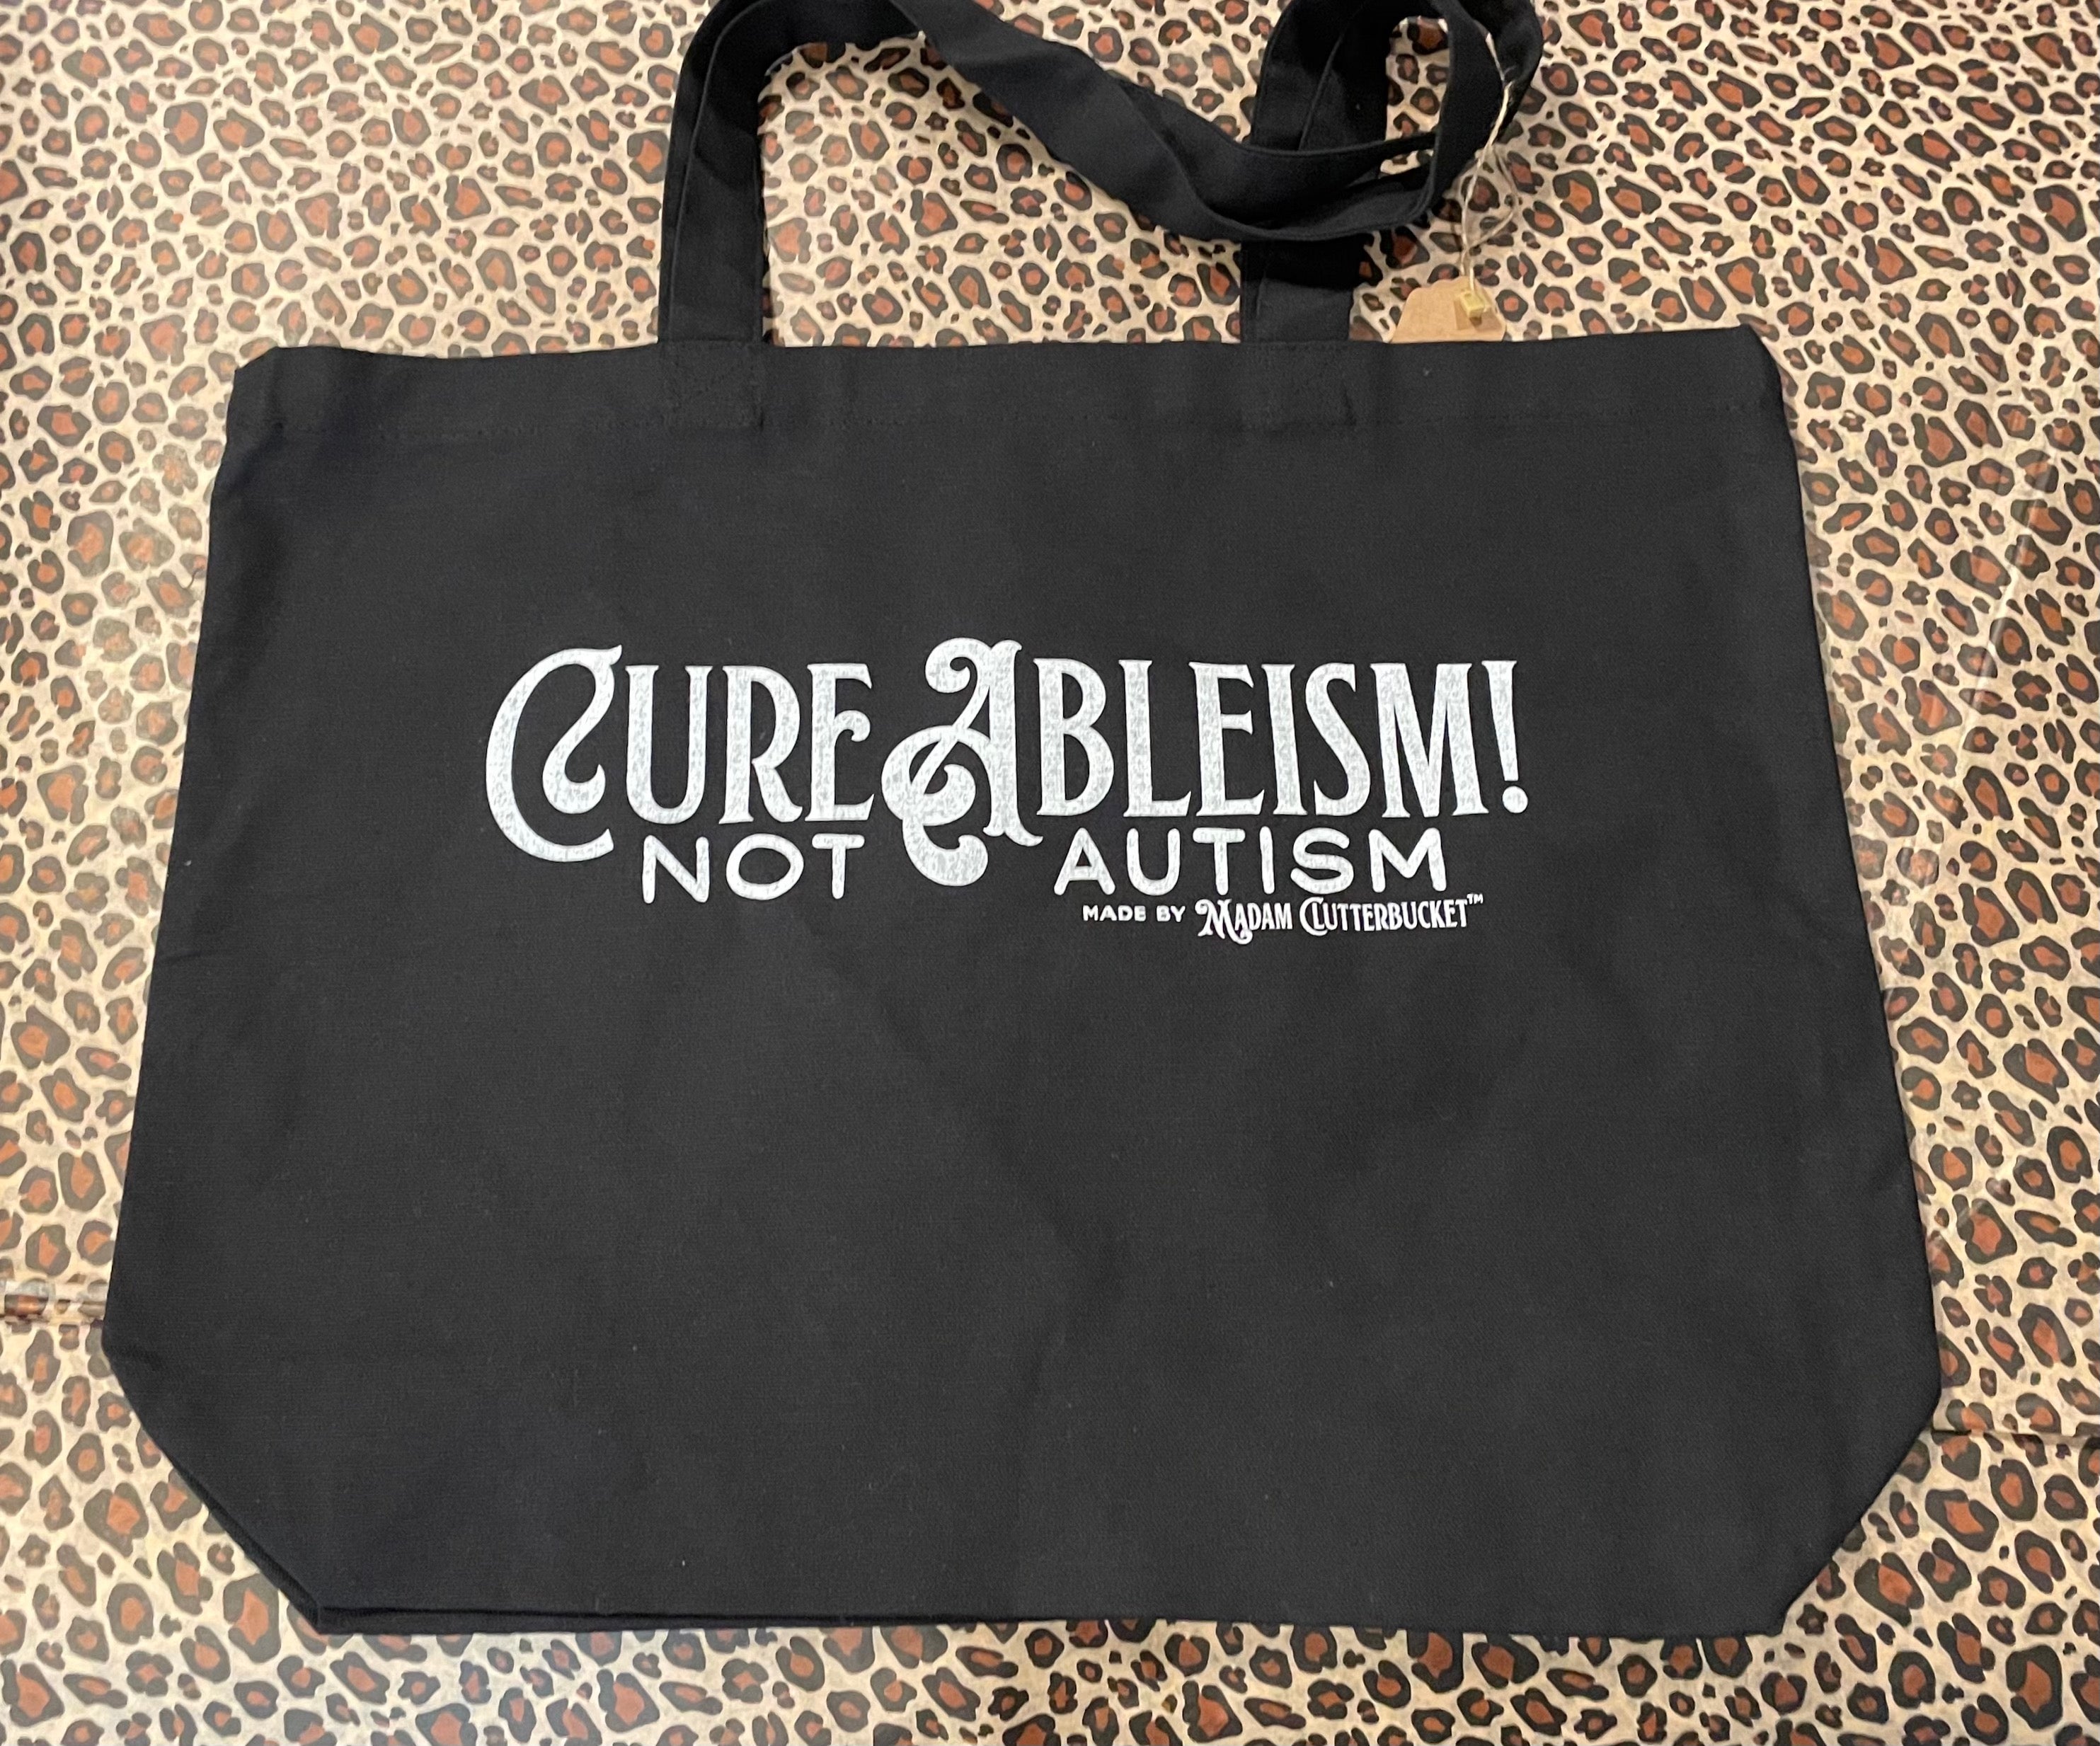 Cure Ableism Tote Bags!